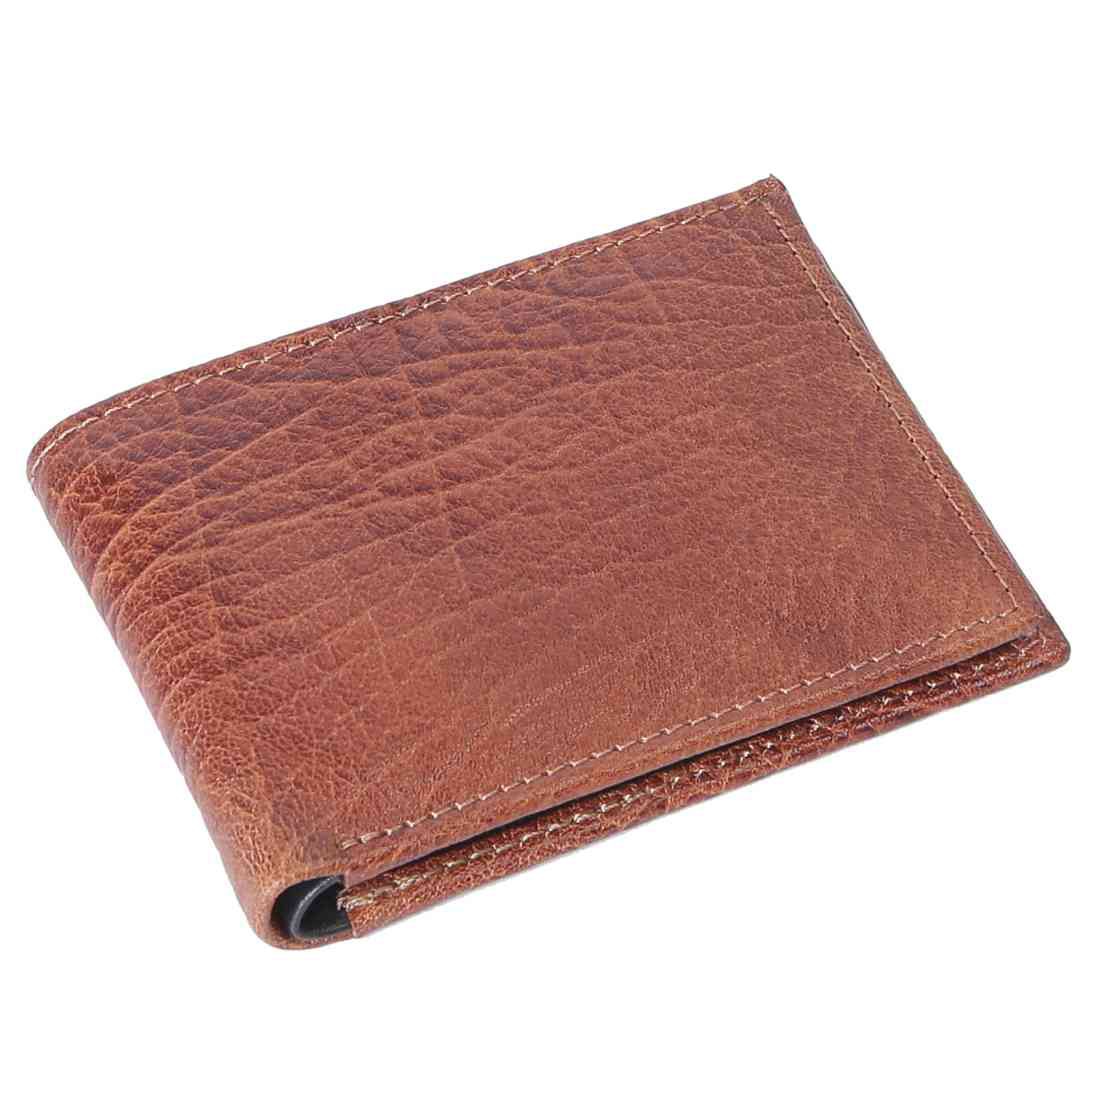 OHM New York Bill Fold Leather Wallet in Cognac and Black